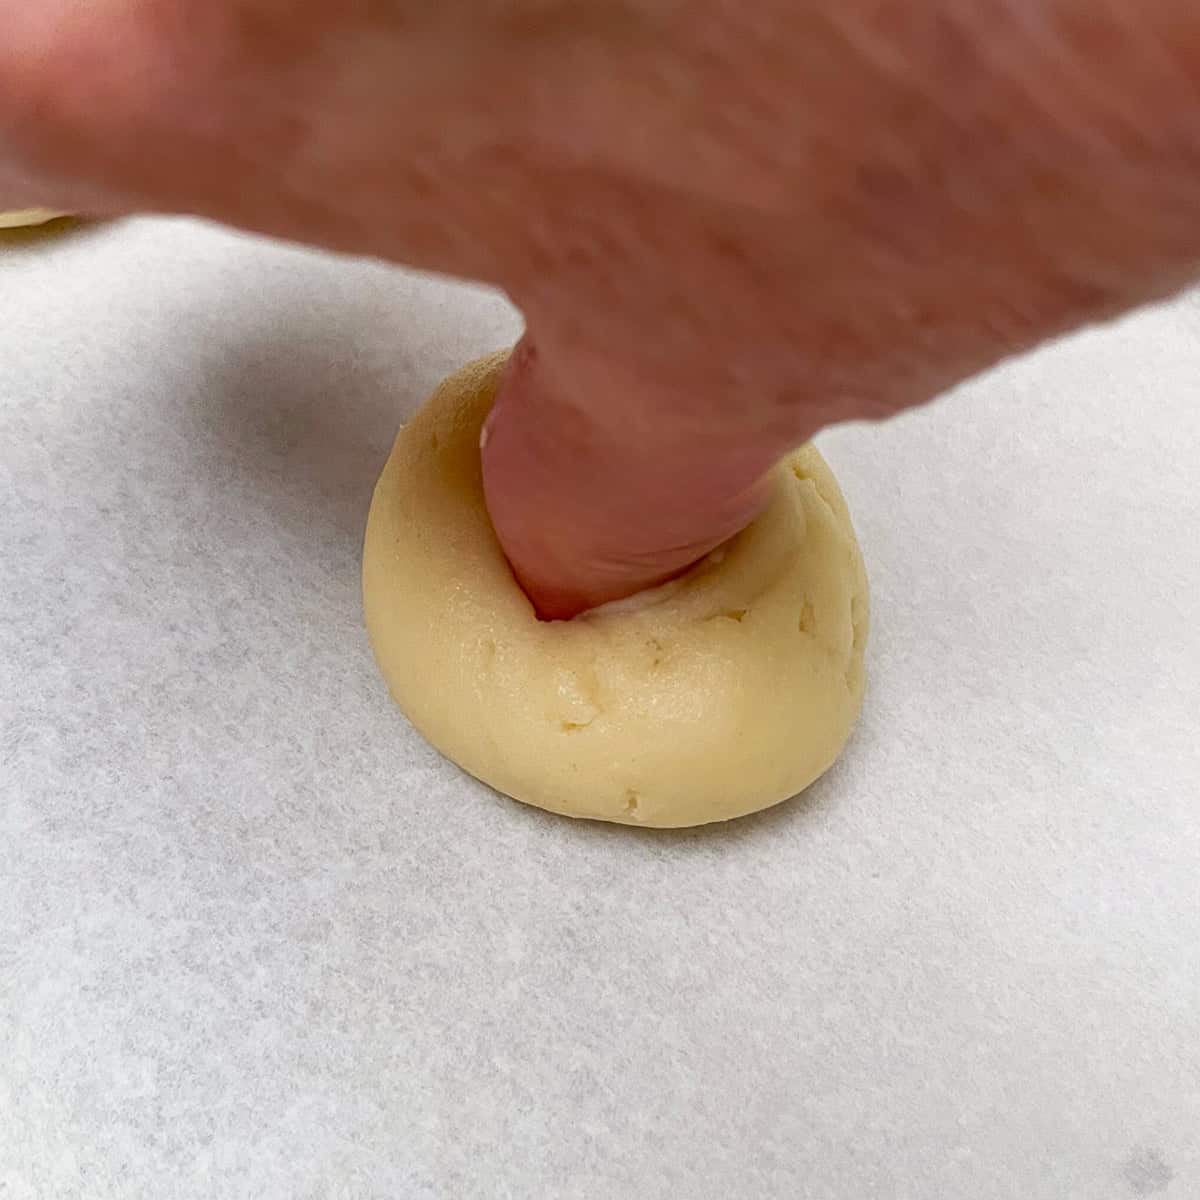 Using your thumb, I am showing how to make a well in the cookie dough ball.